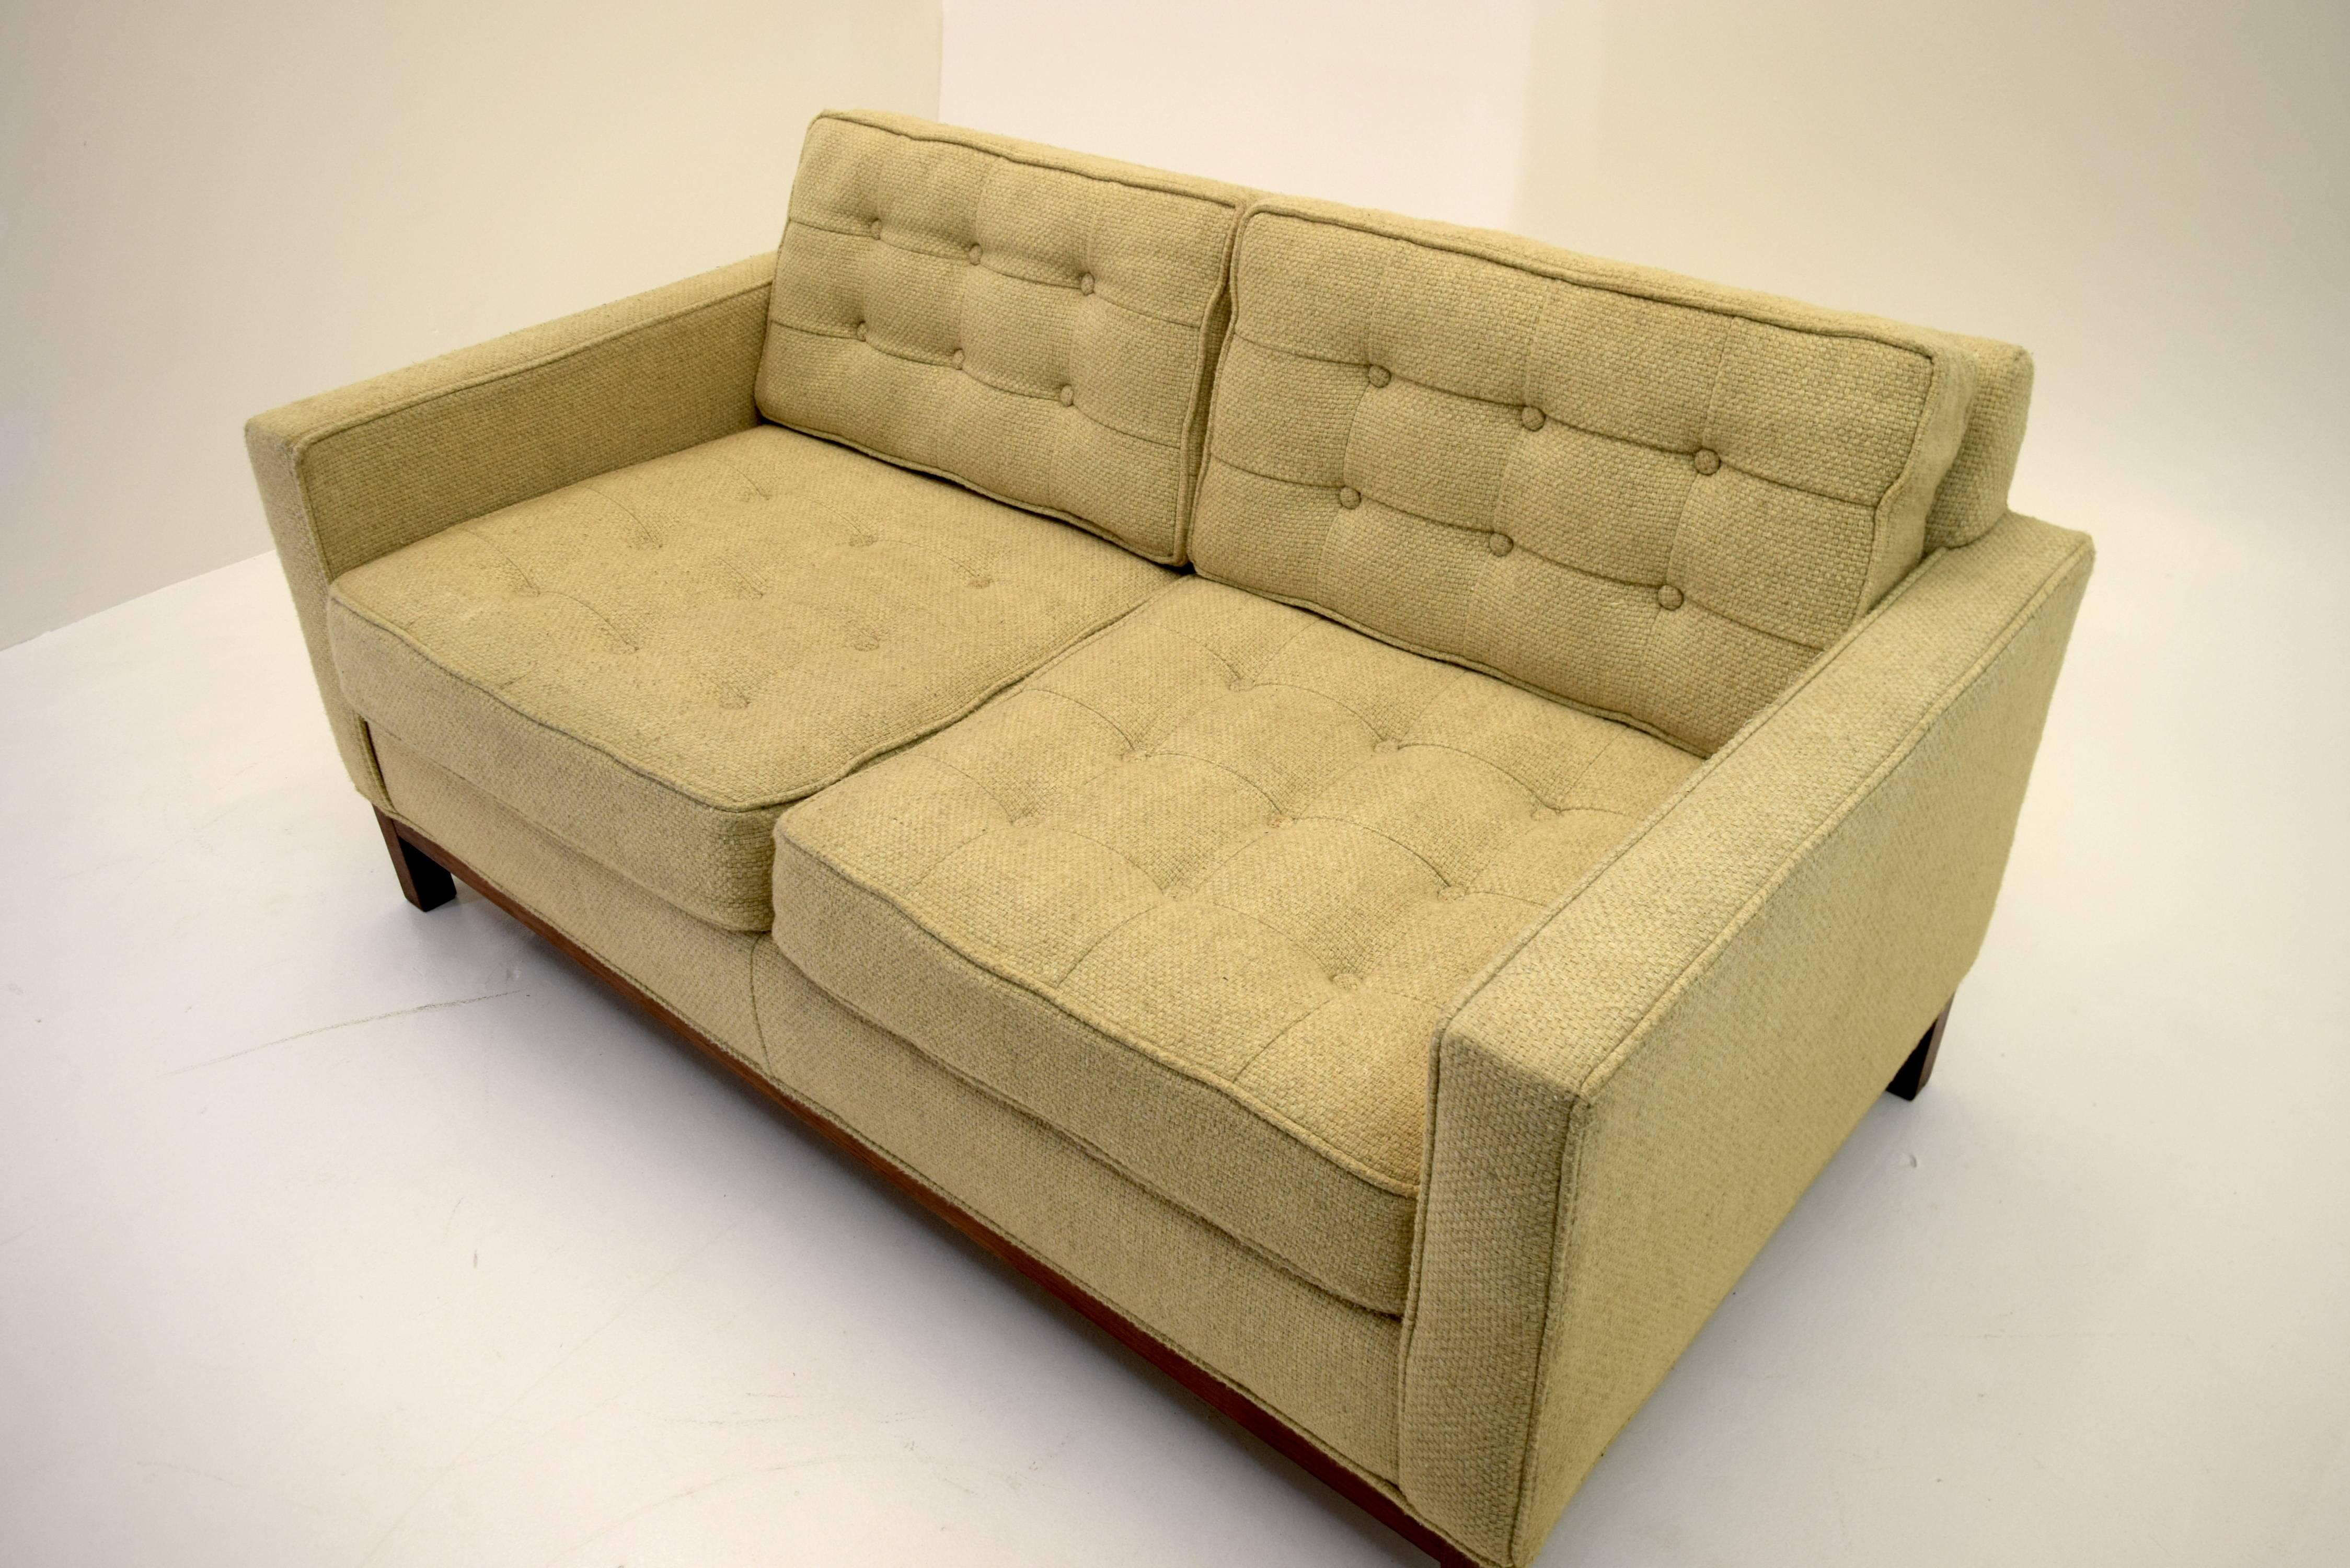 In the style of Florence Knoll
Manufacturer and designer unknown
High quality construction, detachable cushions
29 tall on back, back seat cushions make it 30 inches. 34 inches deep and 60 inches wide. 
Seat Height 17.5